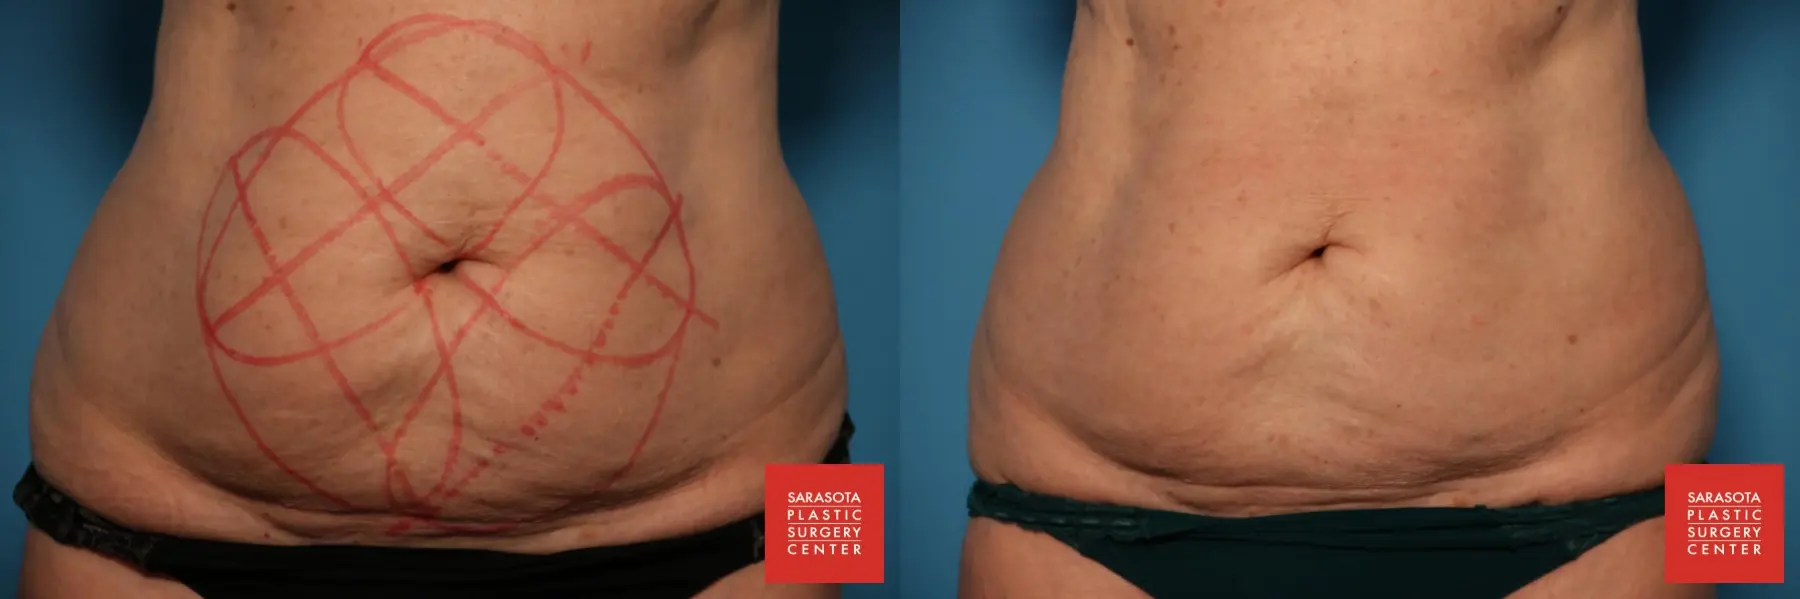 CoolSculpting®: Patient 7 - Before and After  